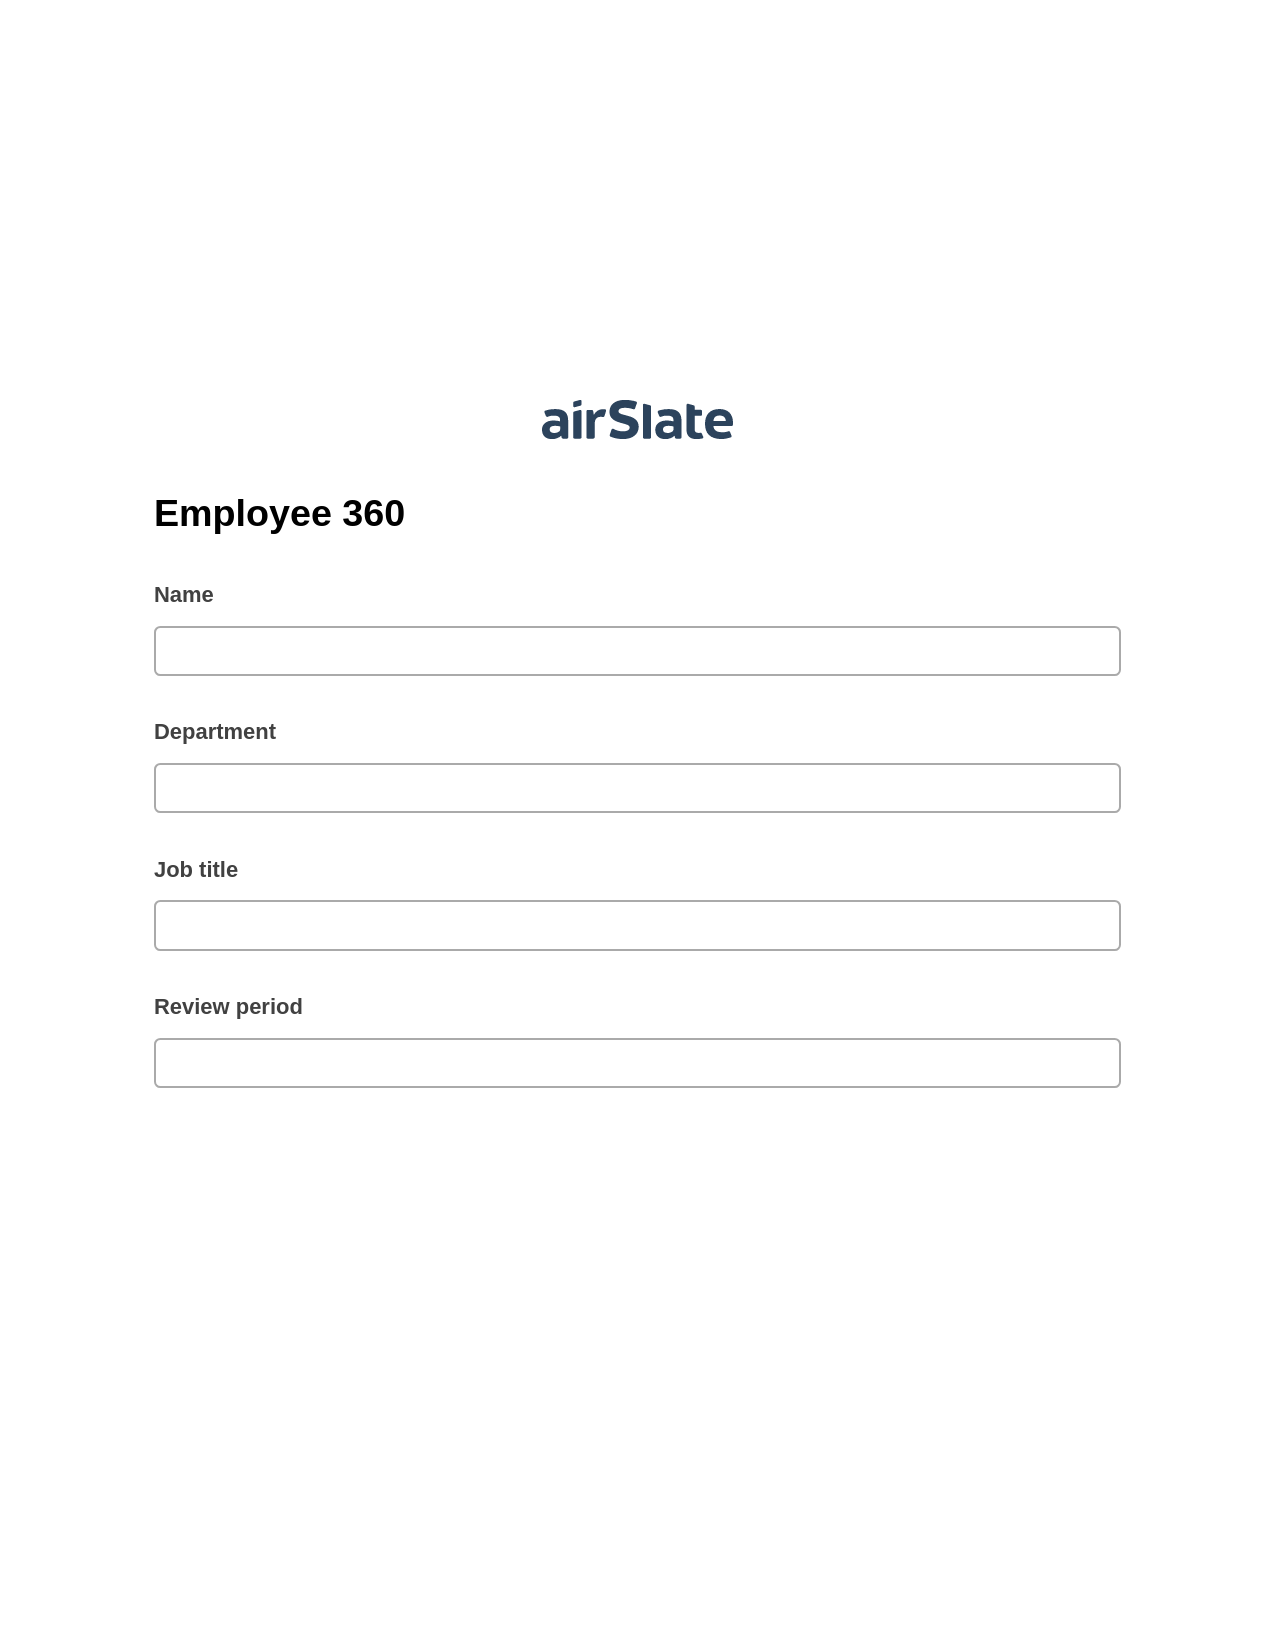 Employee 360 Prefill from NetSuite records, Create slate bot, Export to Smartsheet